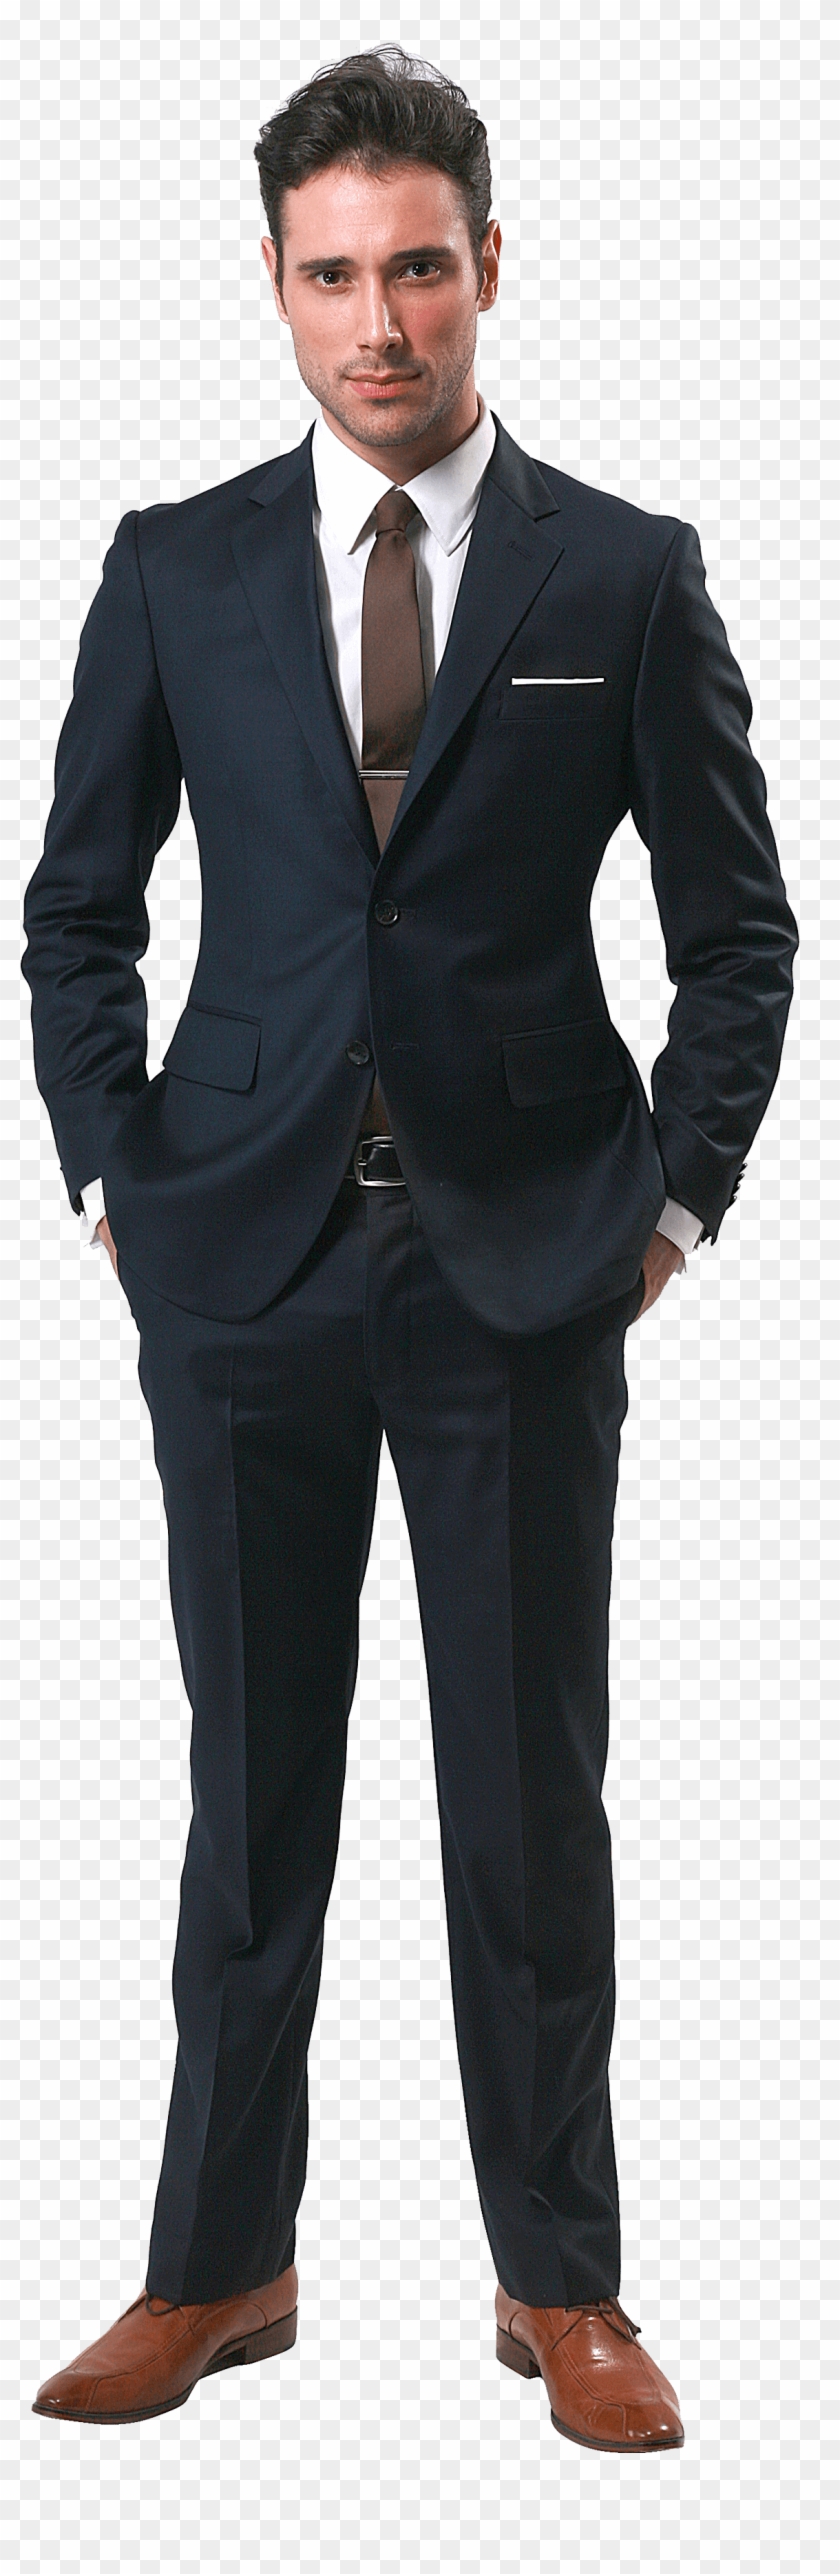 Full Body Businessman Png - Businessman Png Clipart #5992708